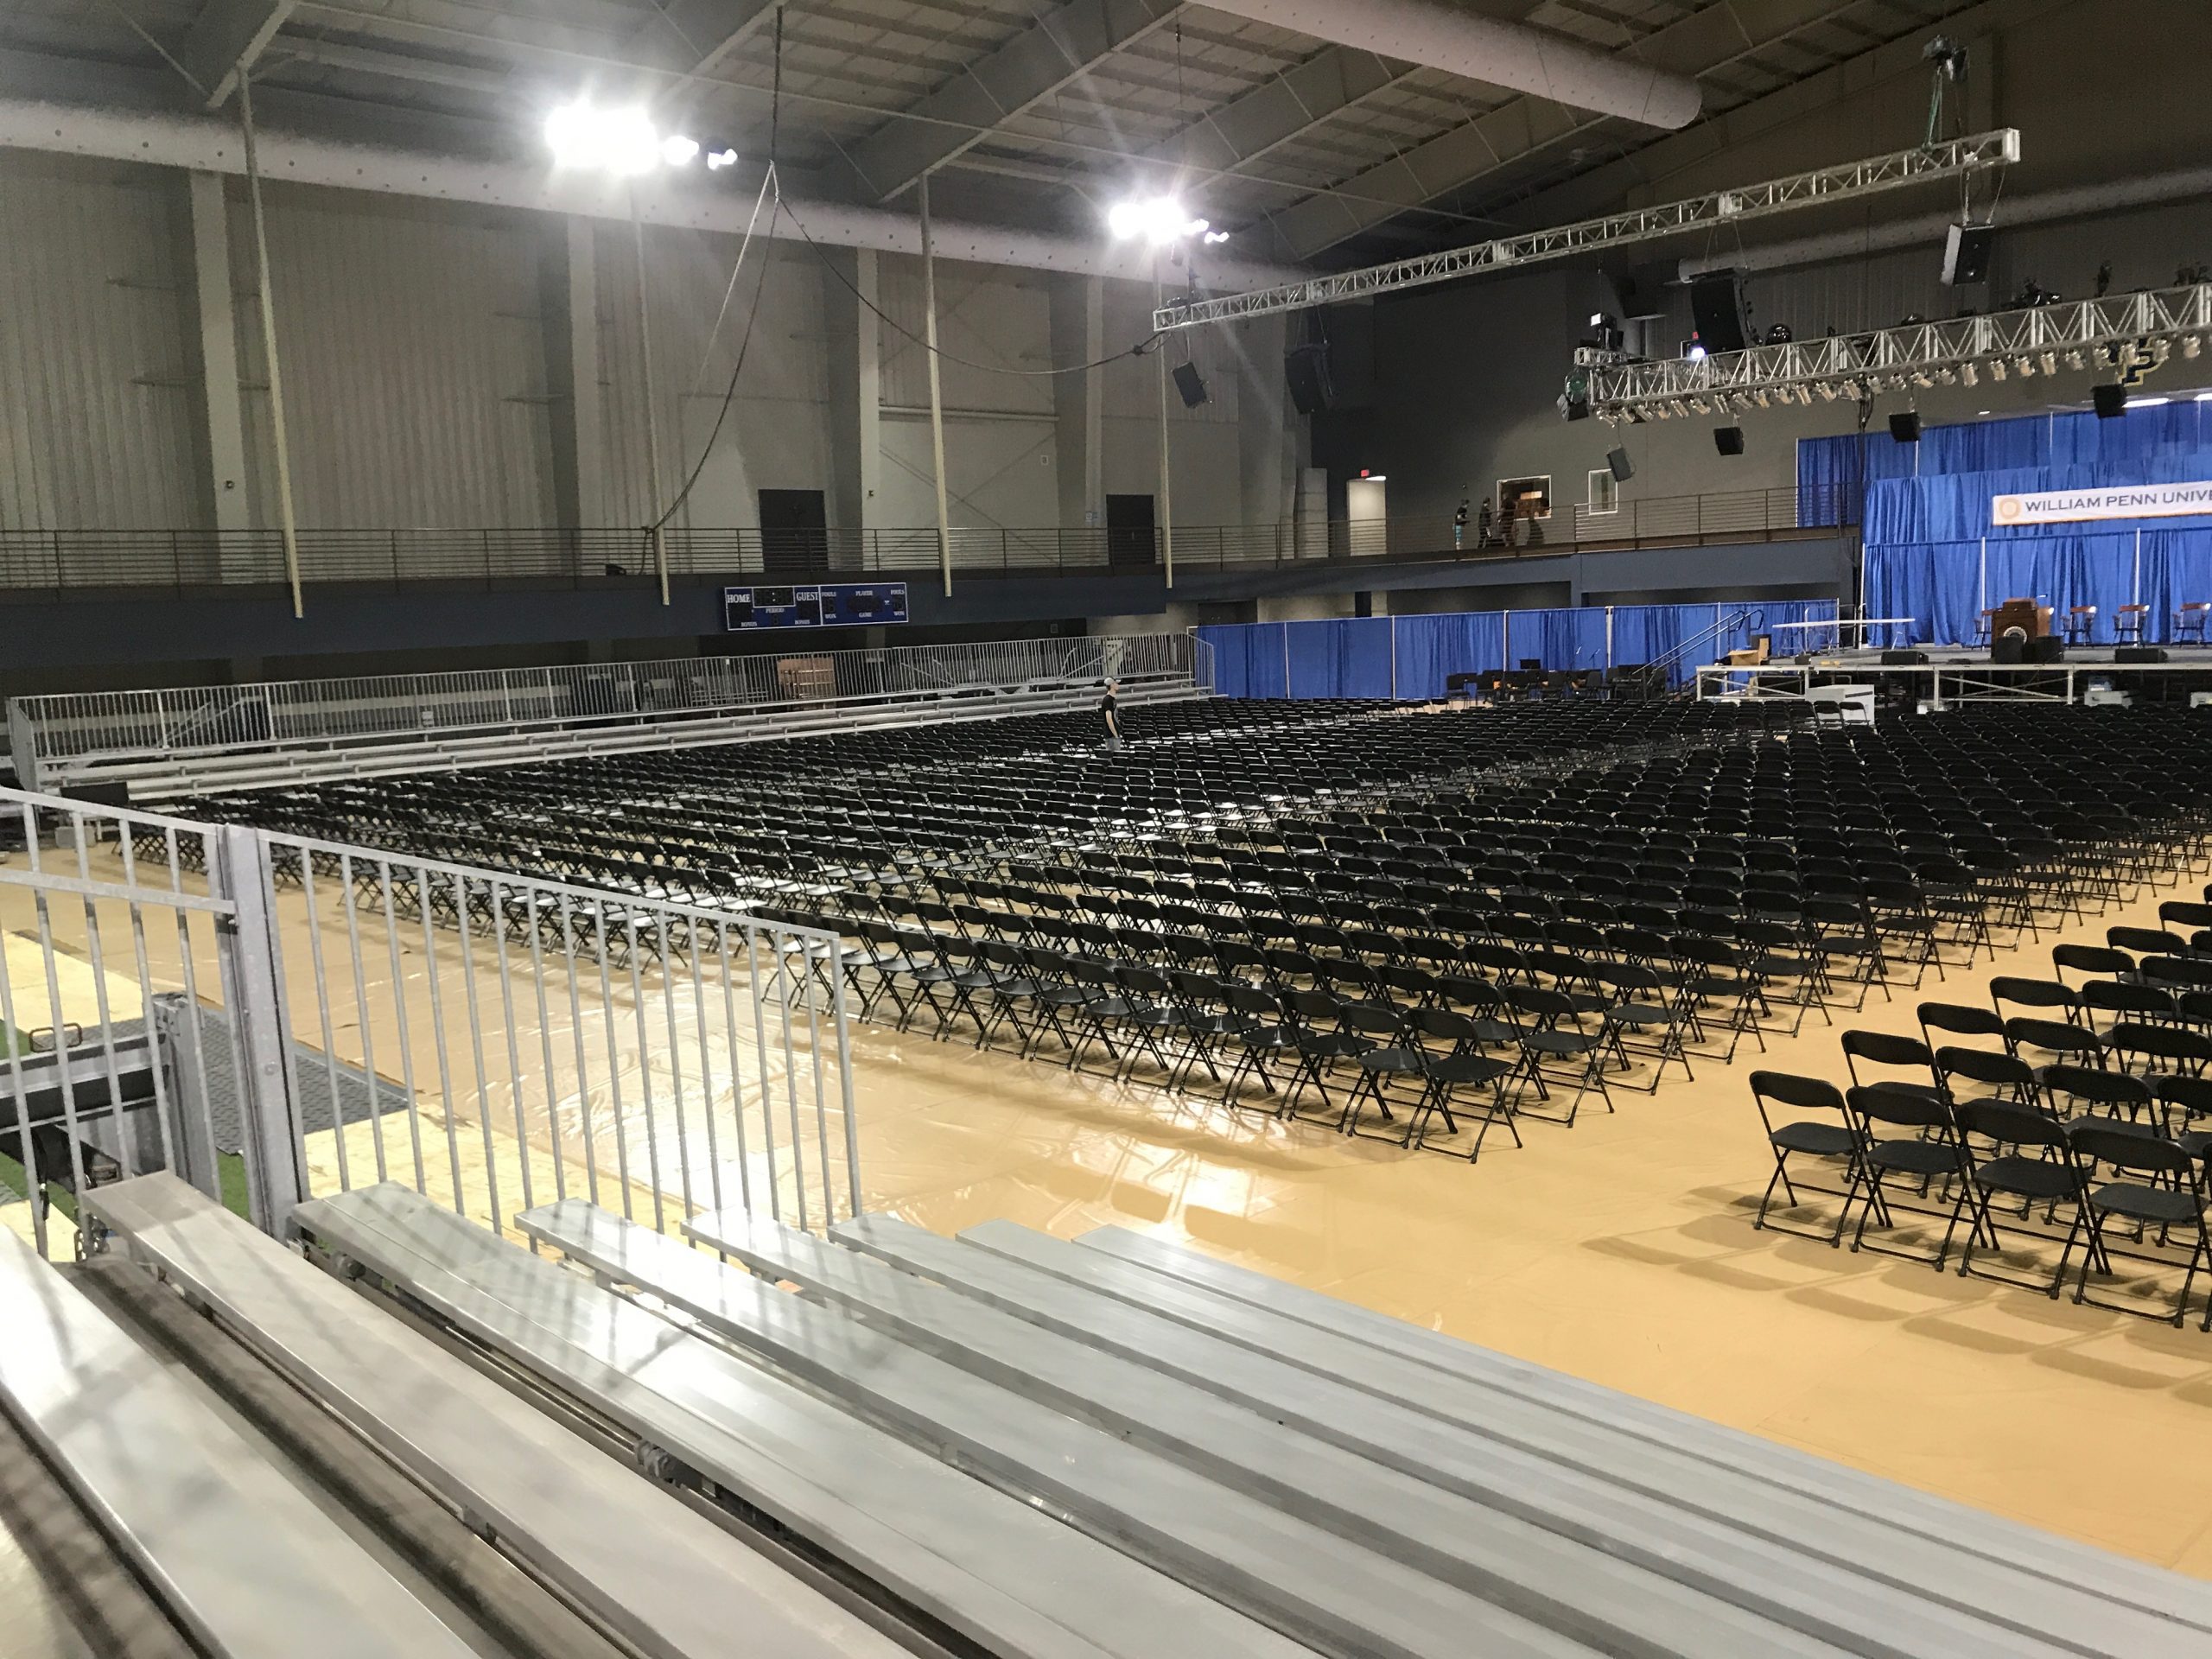 2017 Graduation at William Penn University in Oskaloosa, Iowa with Stage, Chairs, Bleachers and more